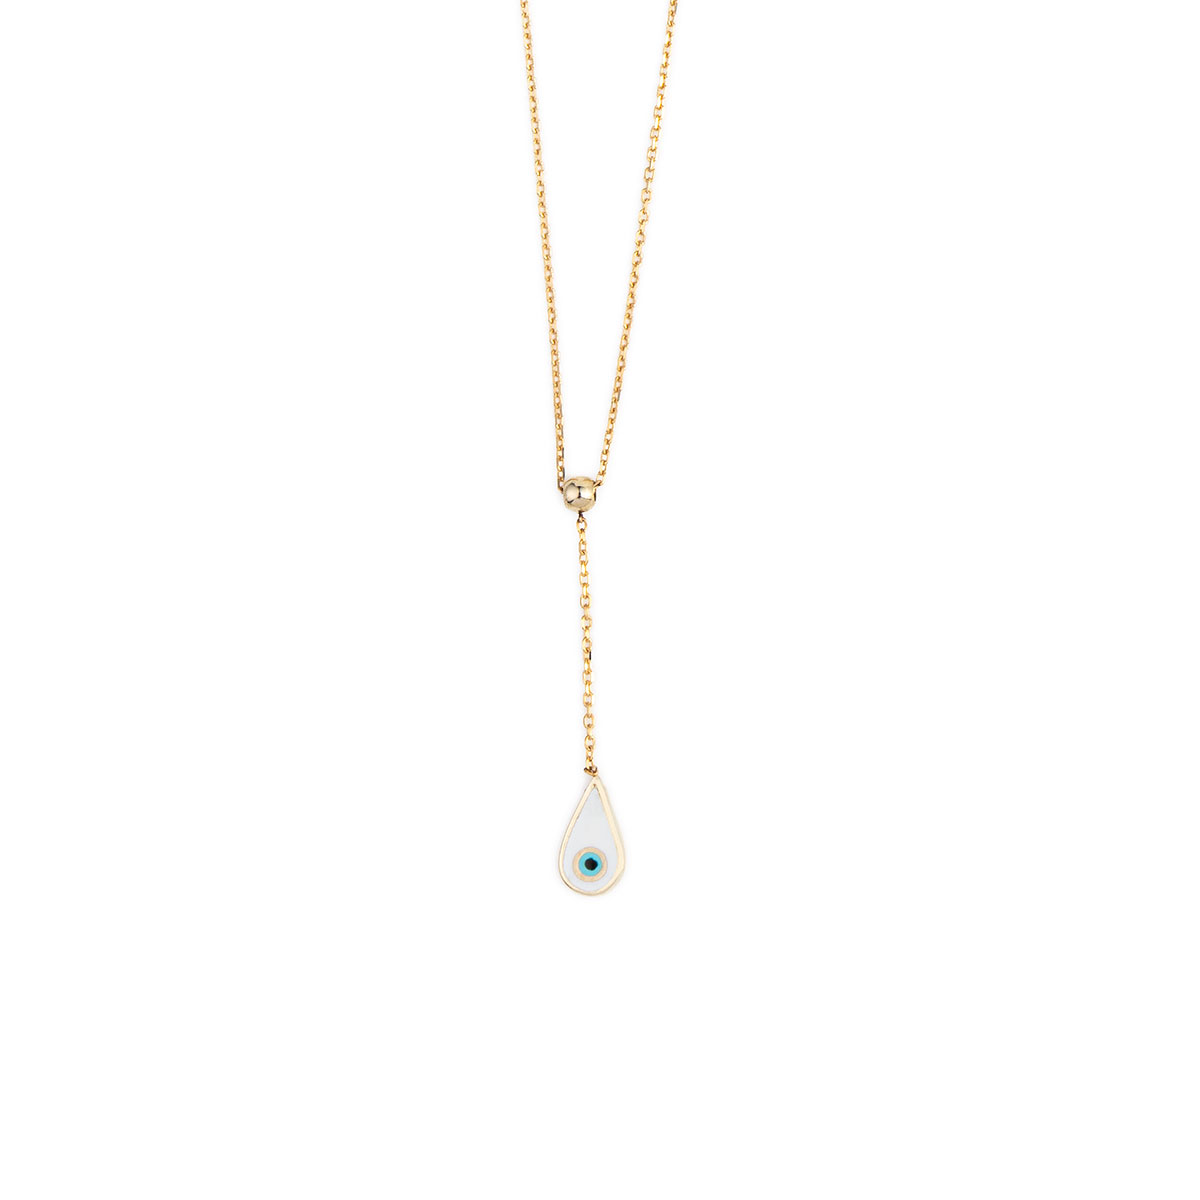 Drop Eye Necklace – 14K Yellow Gold with Enamel